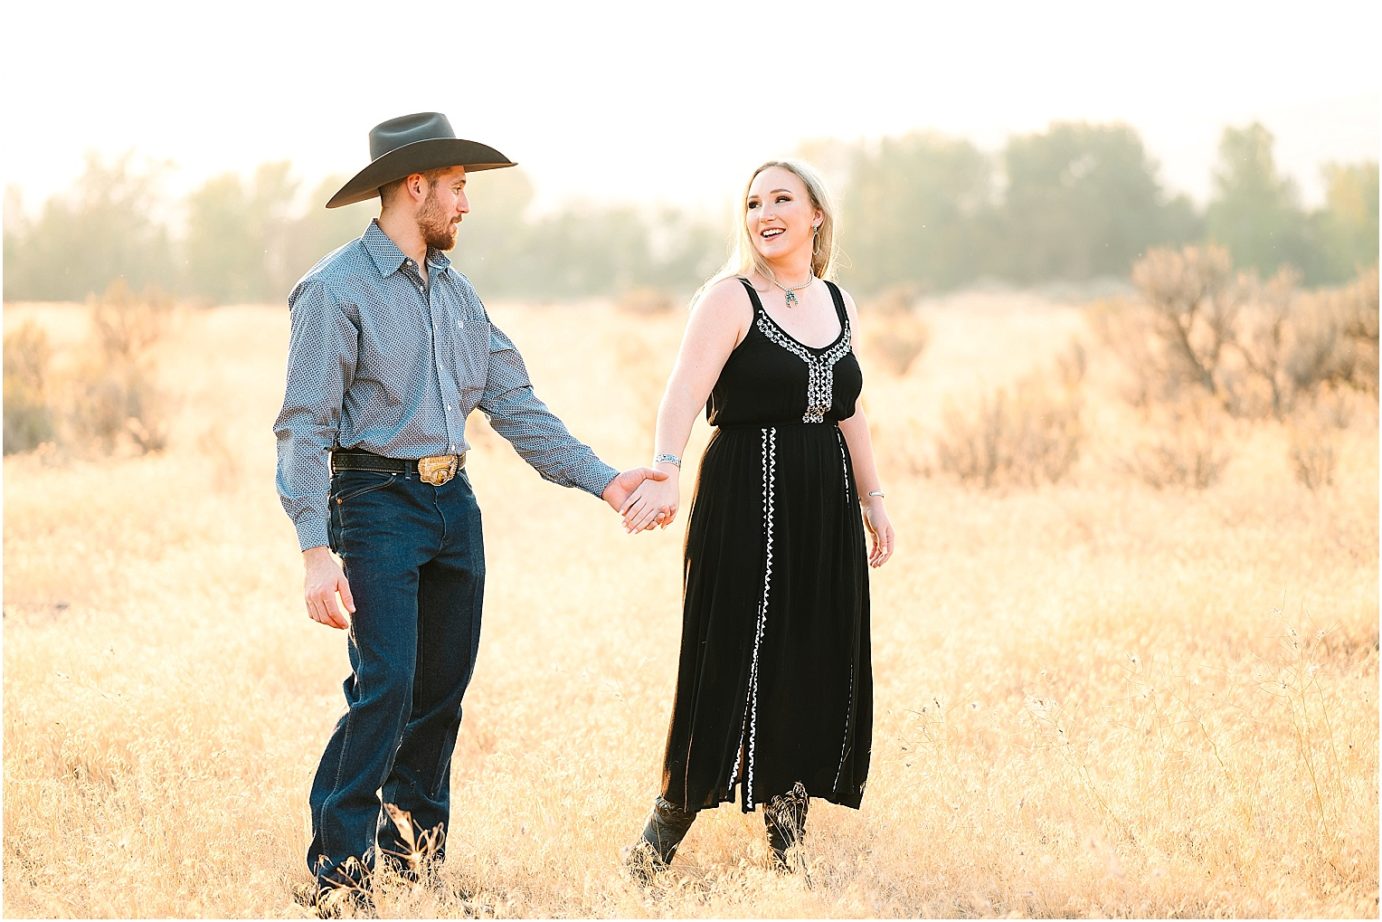 Engagement session in the desert Central WA Andrew and Shelby couple leading each other through a golden field